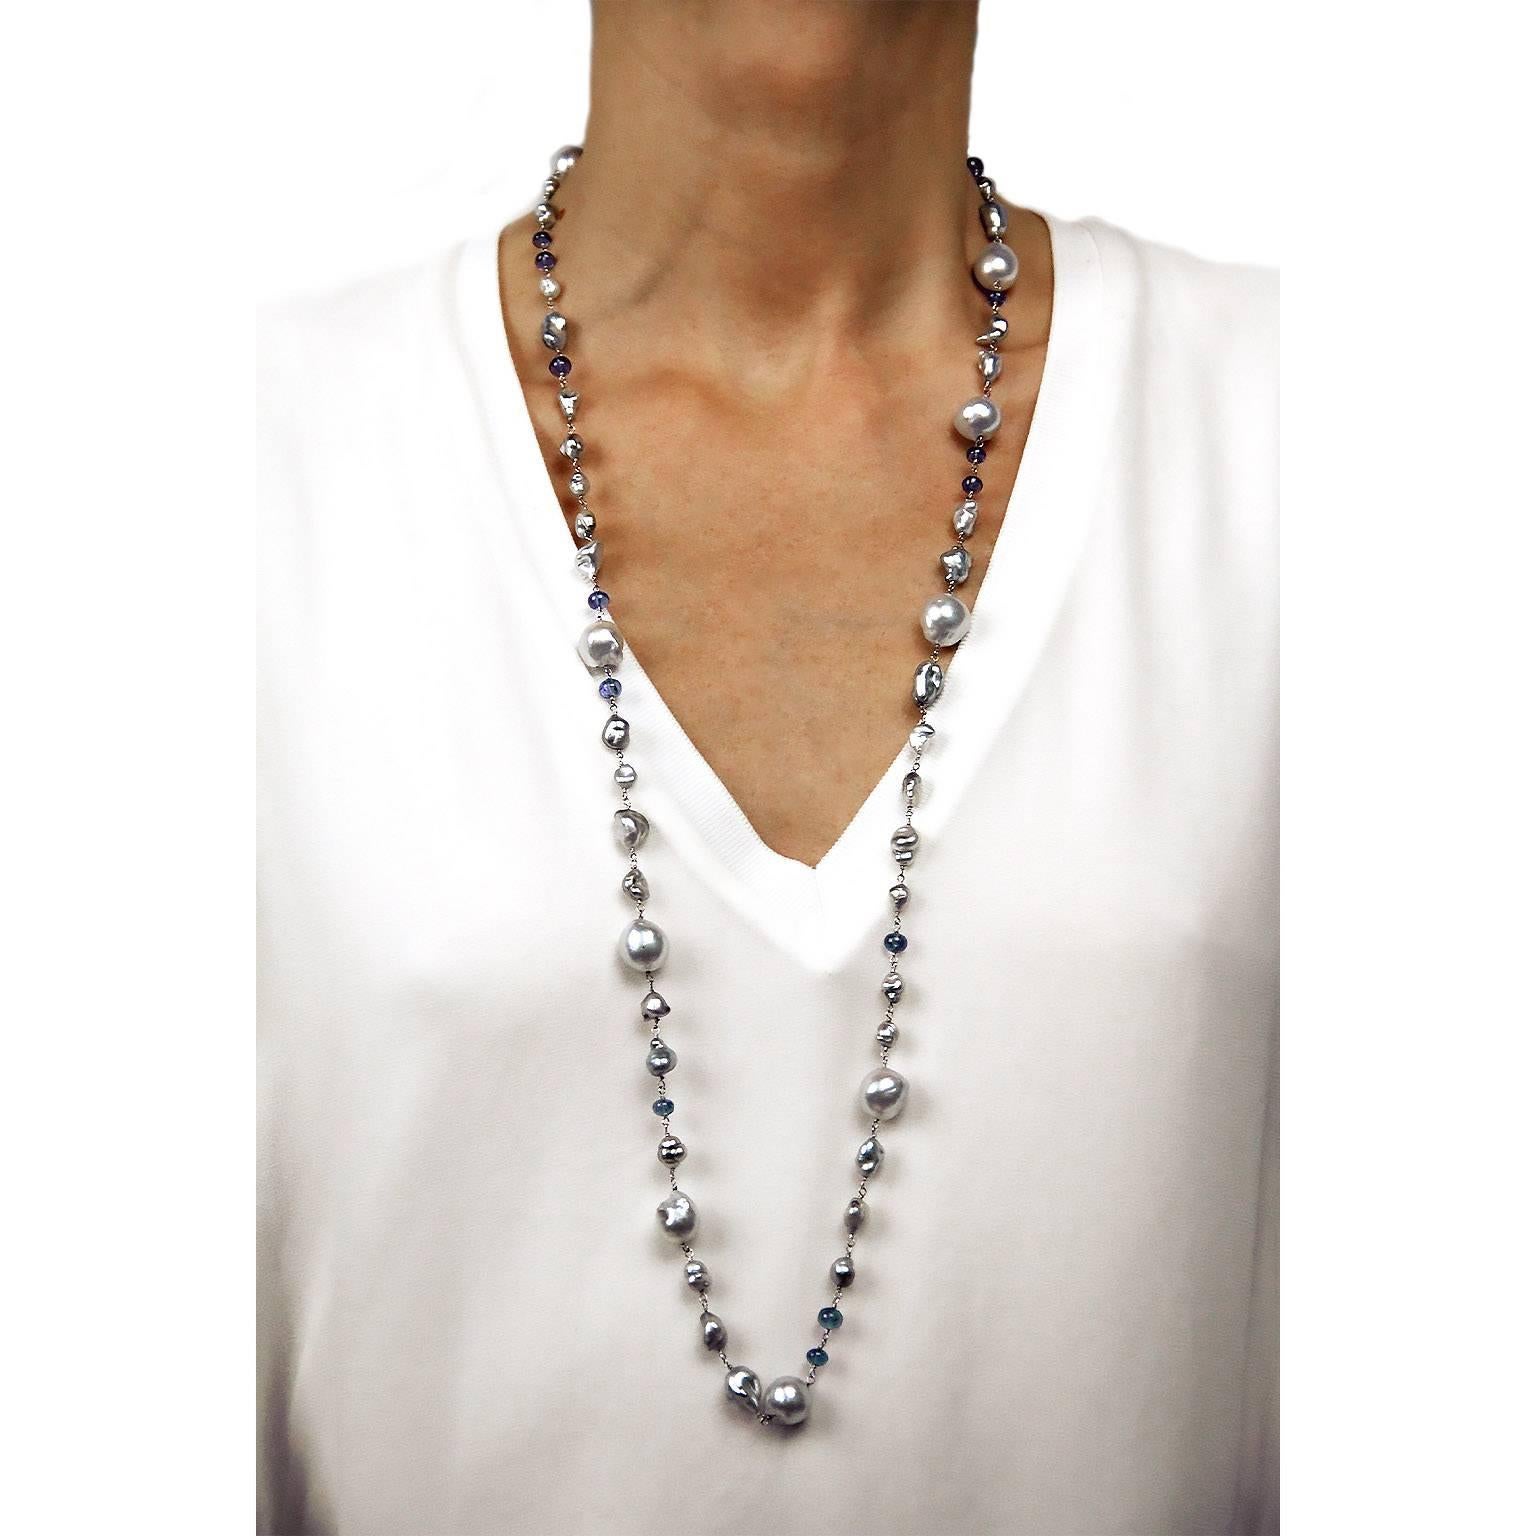 Jona design collection, hand crafted in Italy, 18 karat white gold, 35.43 in / 90 cm long sautoir necklace featuring 40 keshi grey Tahiti pearls, 9 baroque Tahiti grey pearls, alternating with 15 cabochon tanzanites.

All Jona jewelry is new and